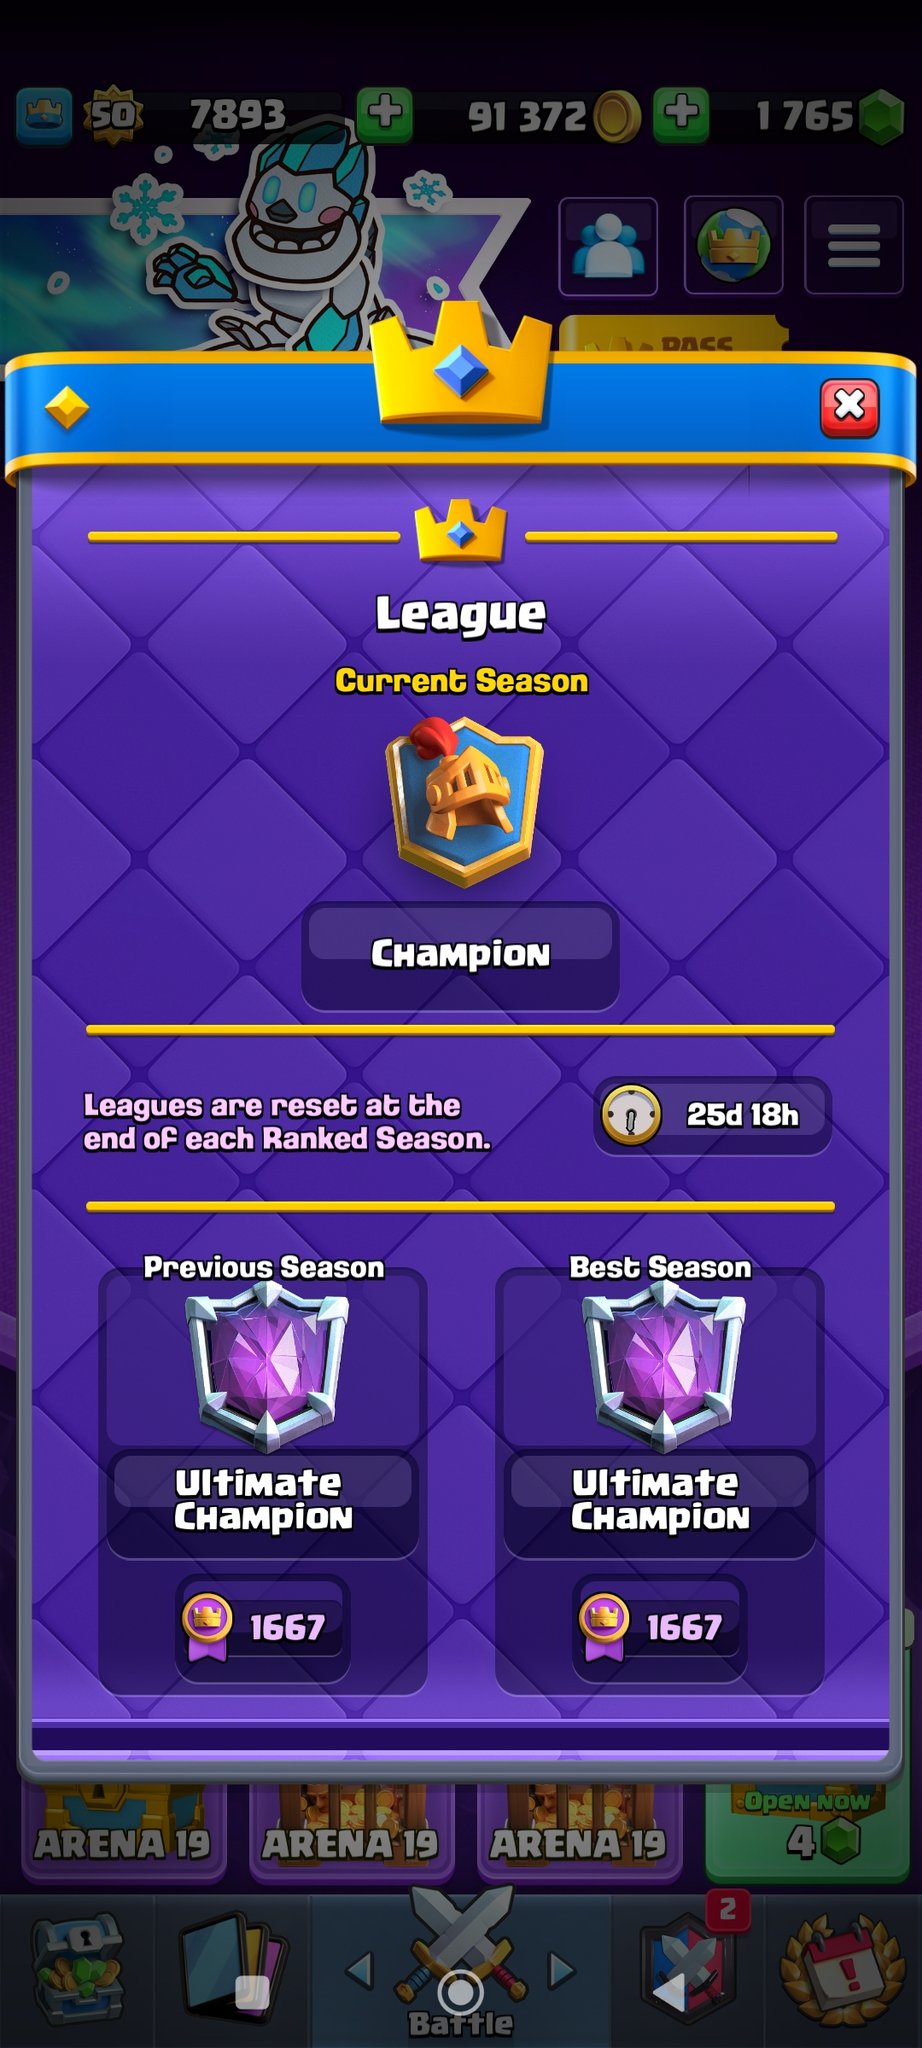 Clash Royale on Twitter: "What's your best ranking in the Path of Legends?  🏆 https://t.co/mWJVqS8zB2" / Twitter